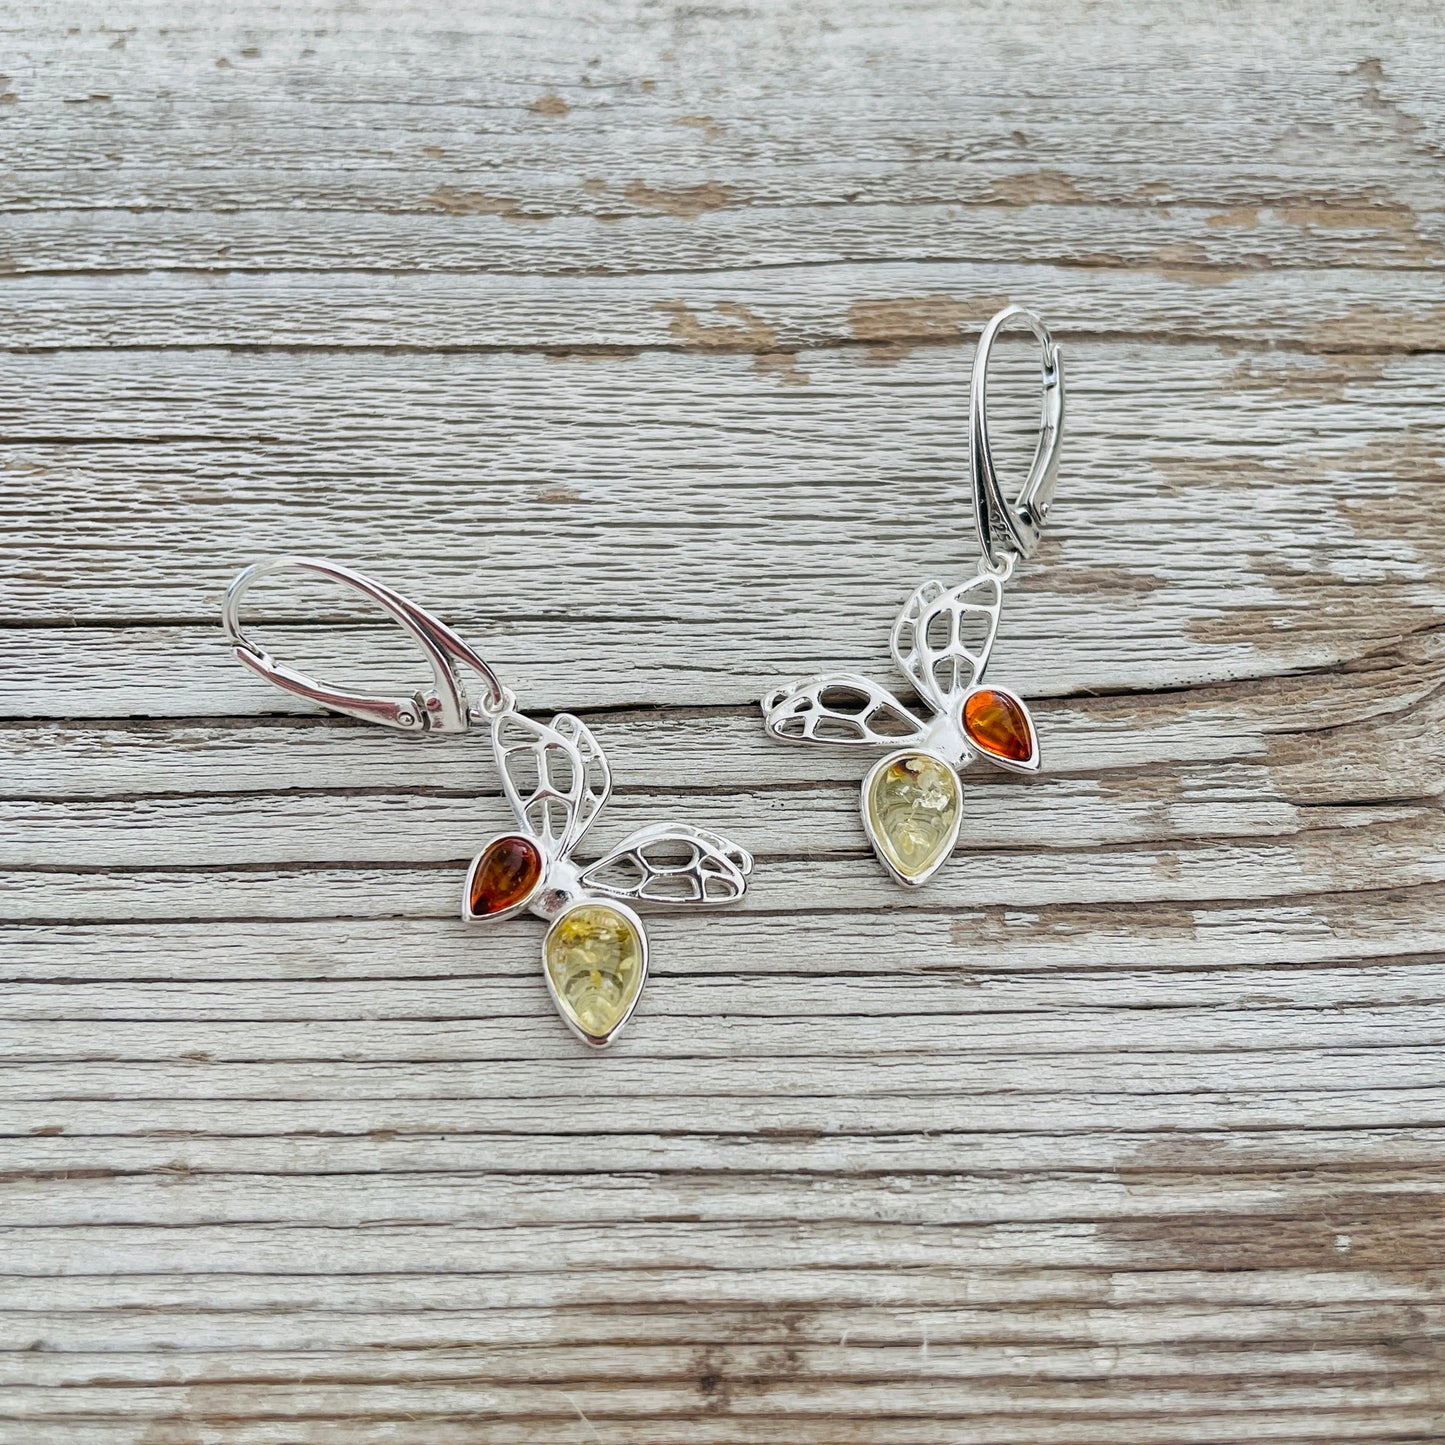 cognac and yellow amber set in butterfly shaped sterling silver earrings